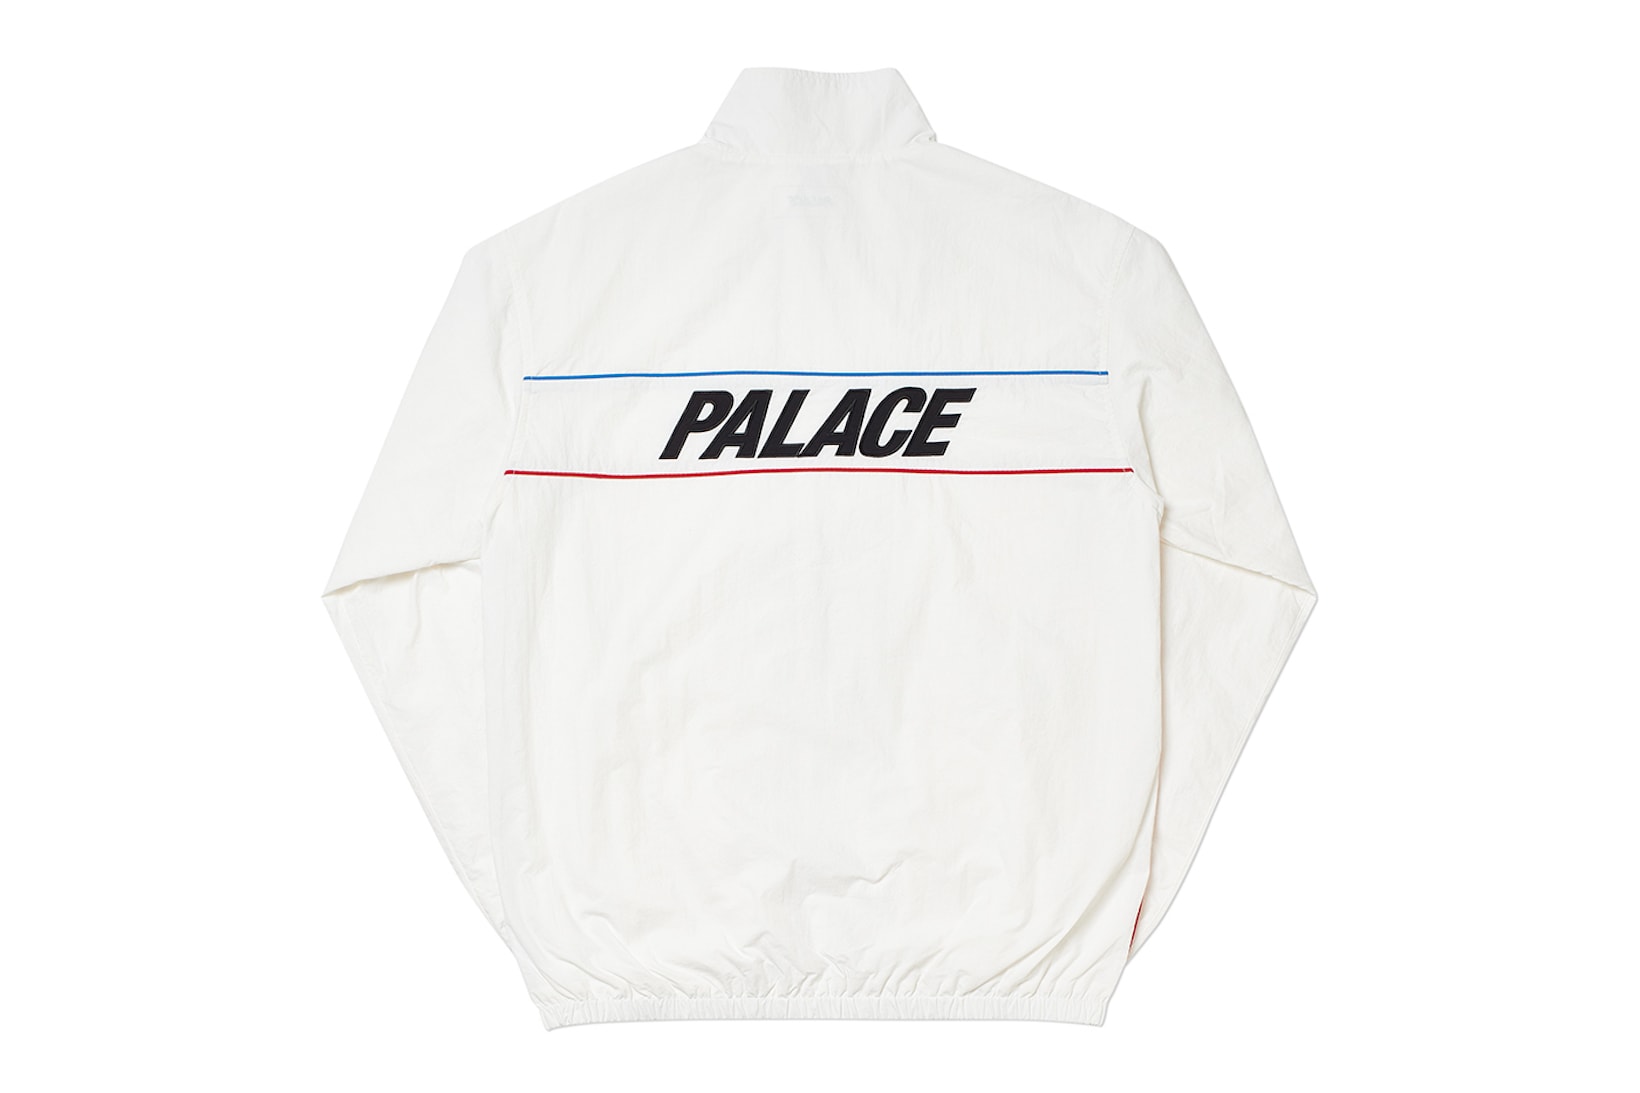 palace skateboards spring collection drop 6 outerwear jackets cardigan green white blue red clothes fashion